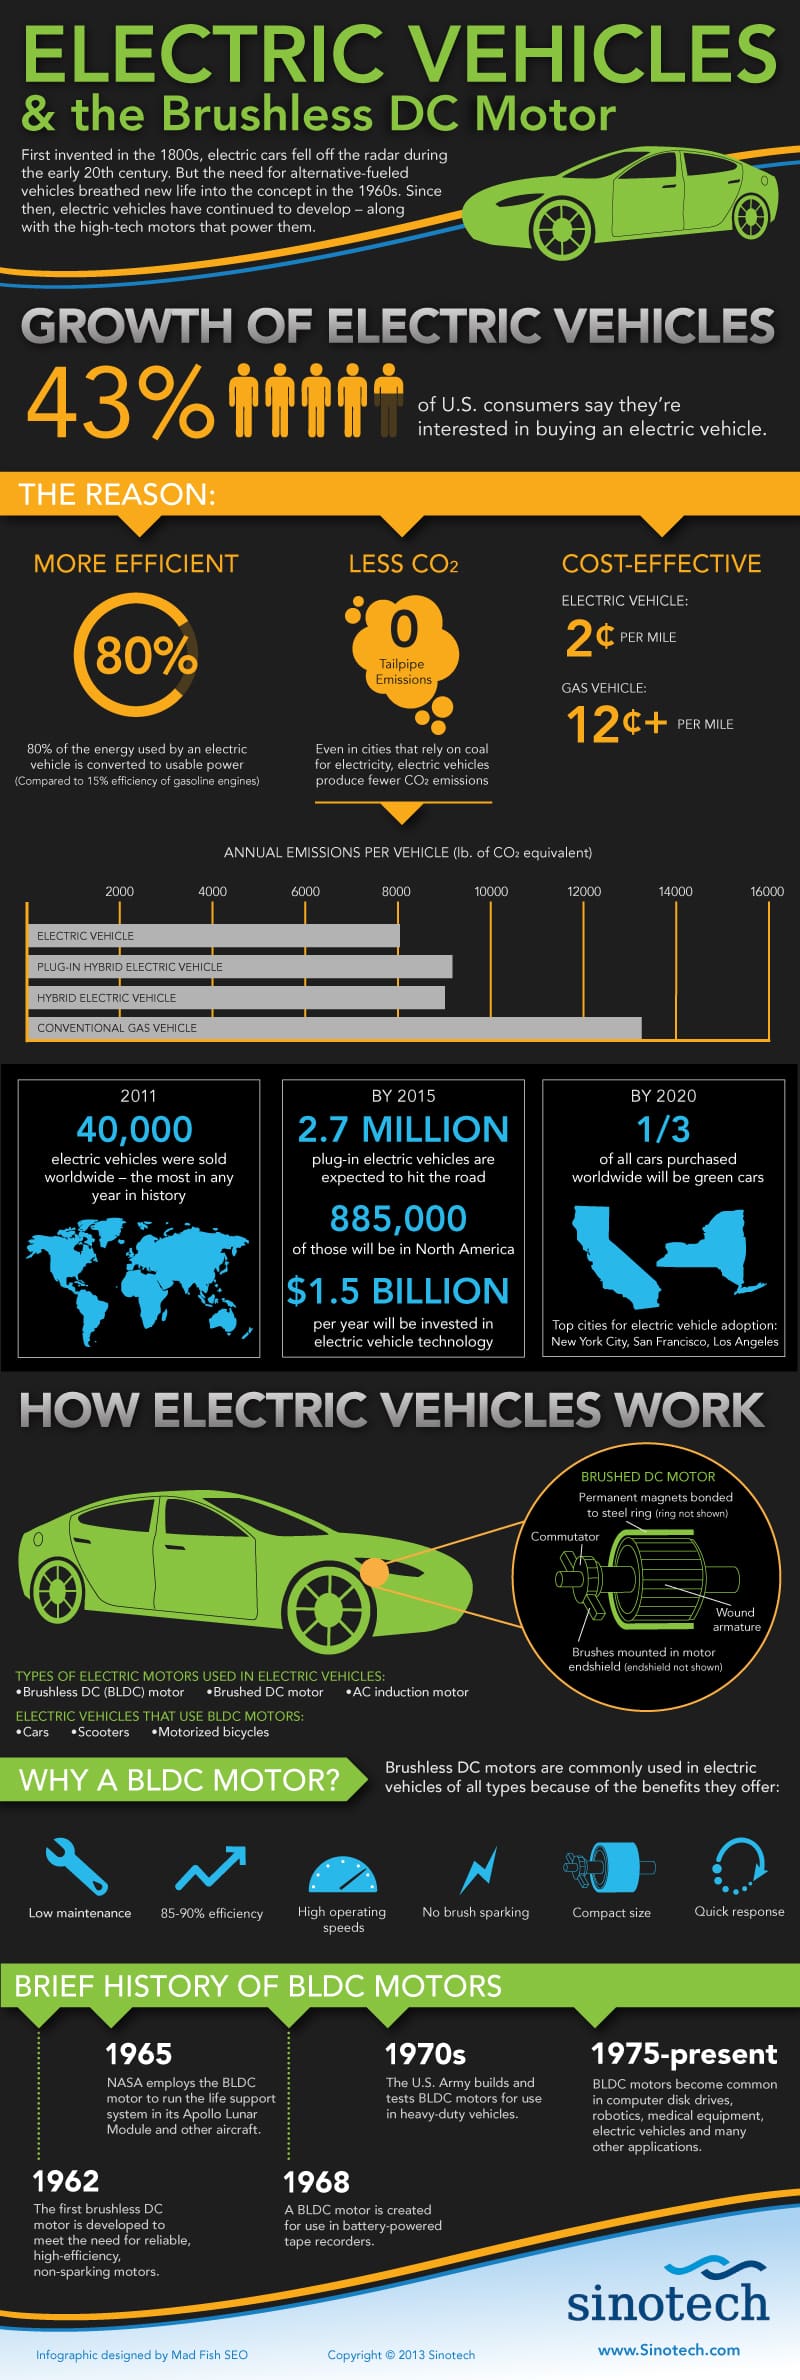 electric vehicles brushless dc motor infographic